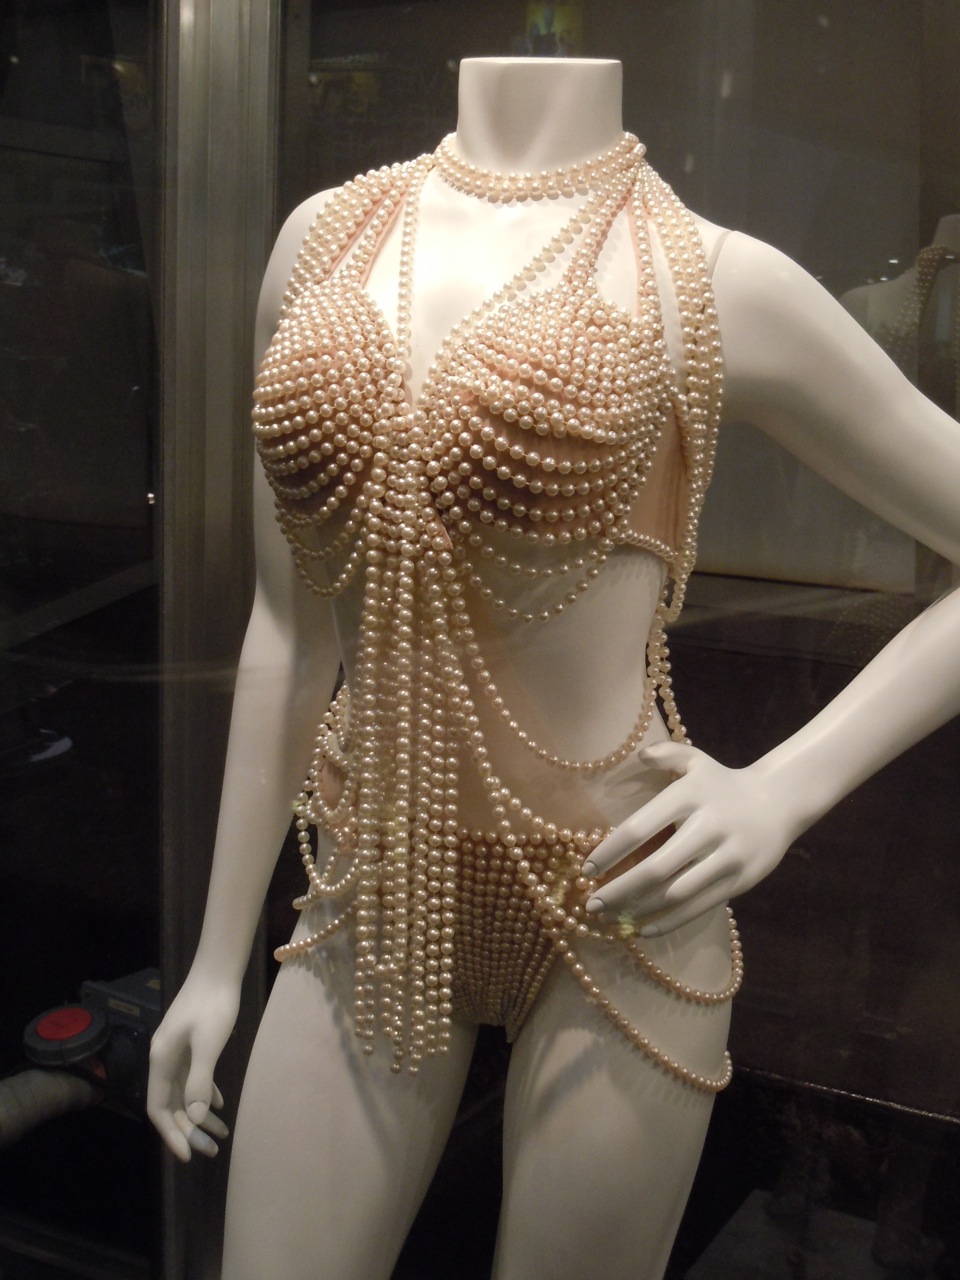 Christina Aguilera's costumes from Burlesque on display